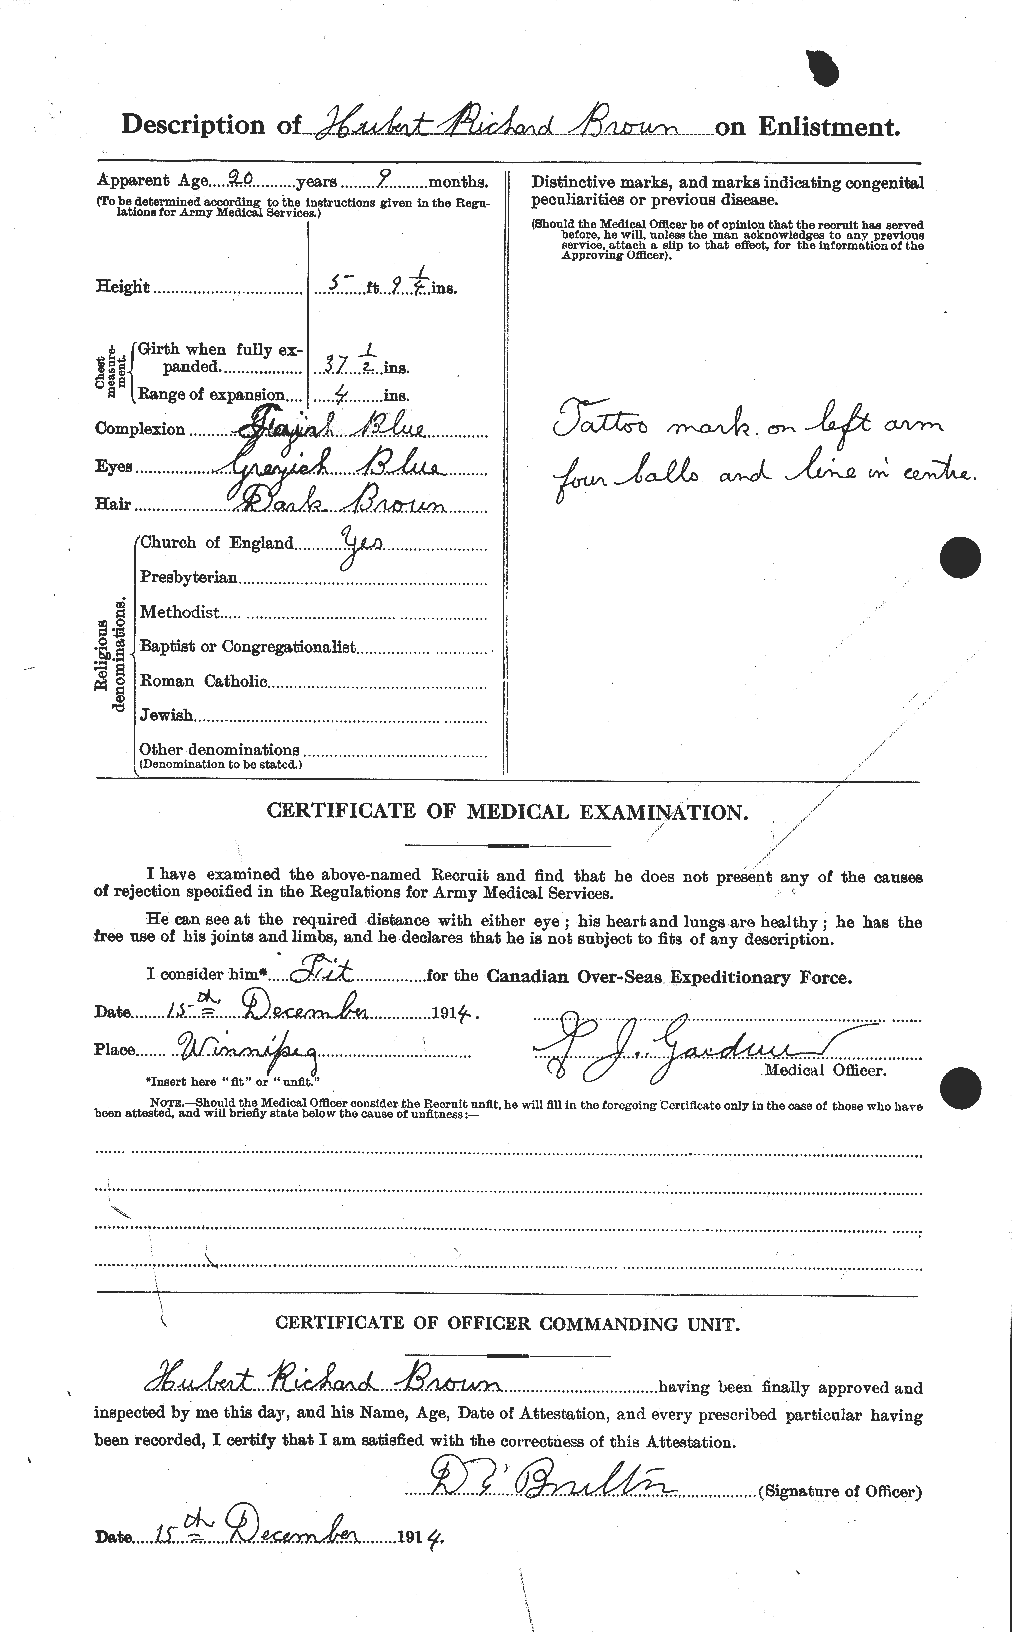 Personnel Records of the First World War - CEF 265629b